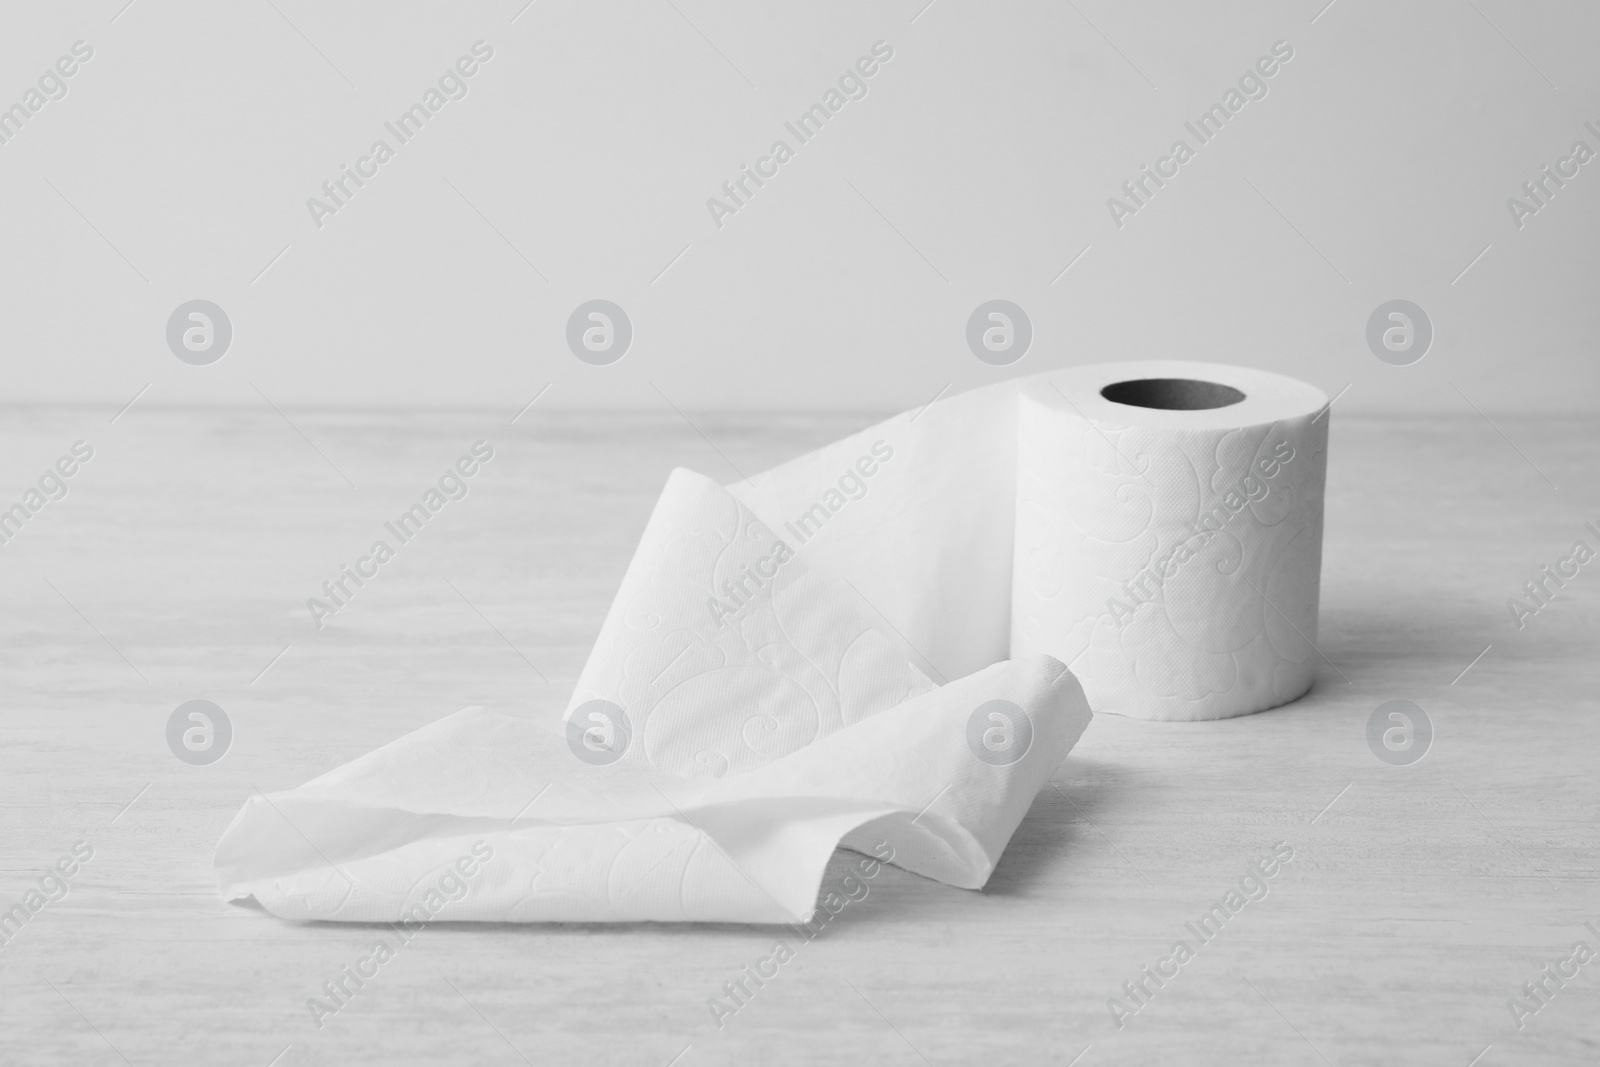 Photo of Soft toilet paper roll on light background